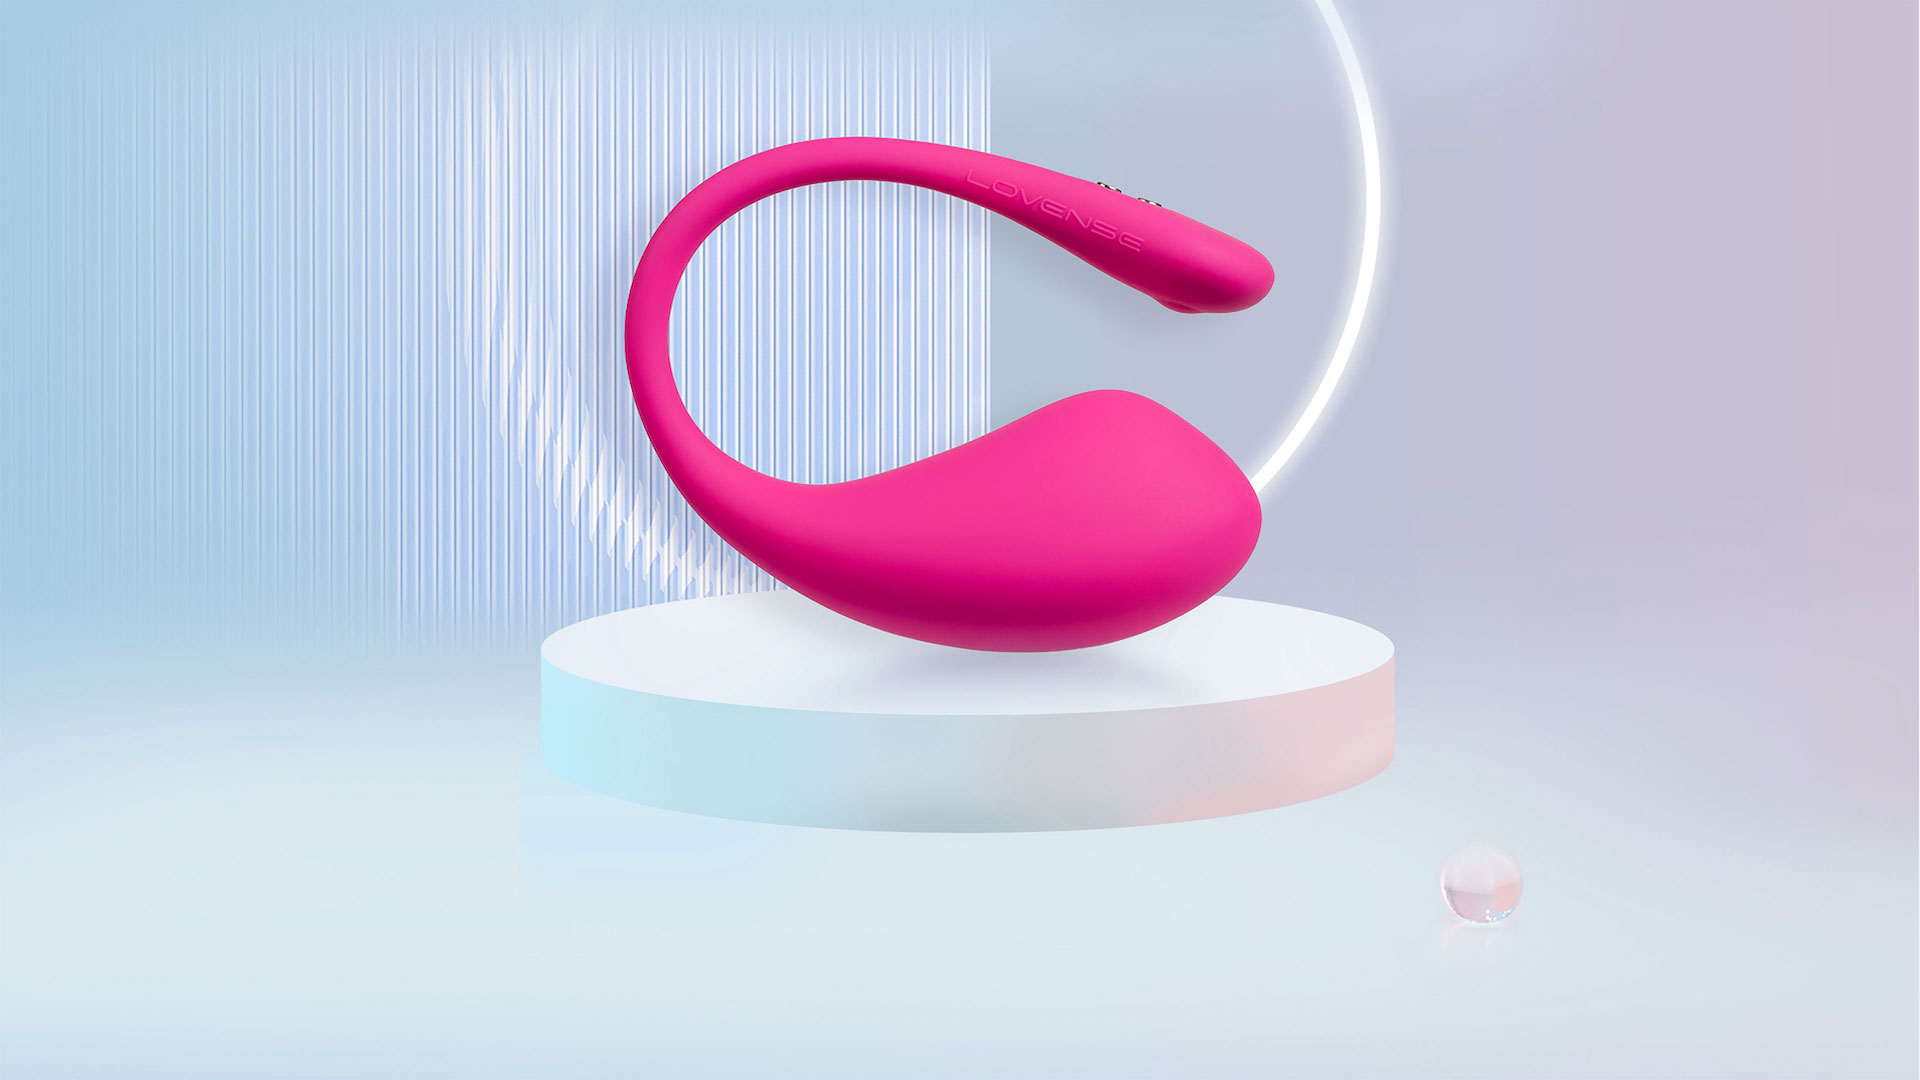 Lush 3 by Lovense. The most powerful Bluetooth remote control vibrator!